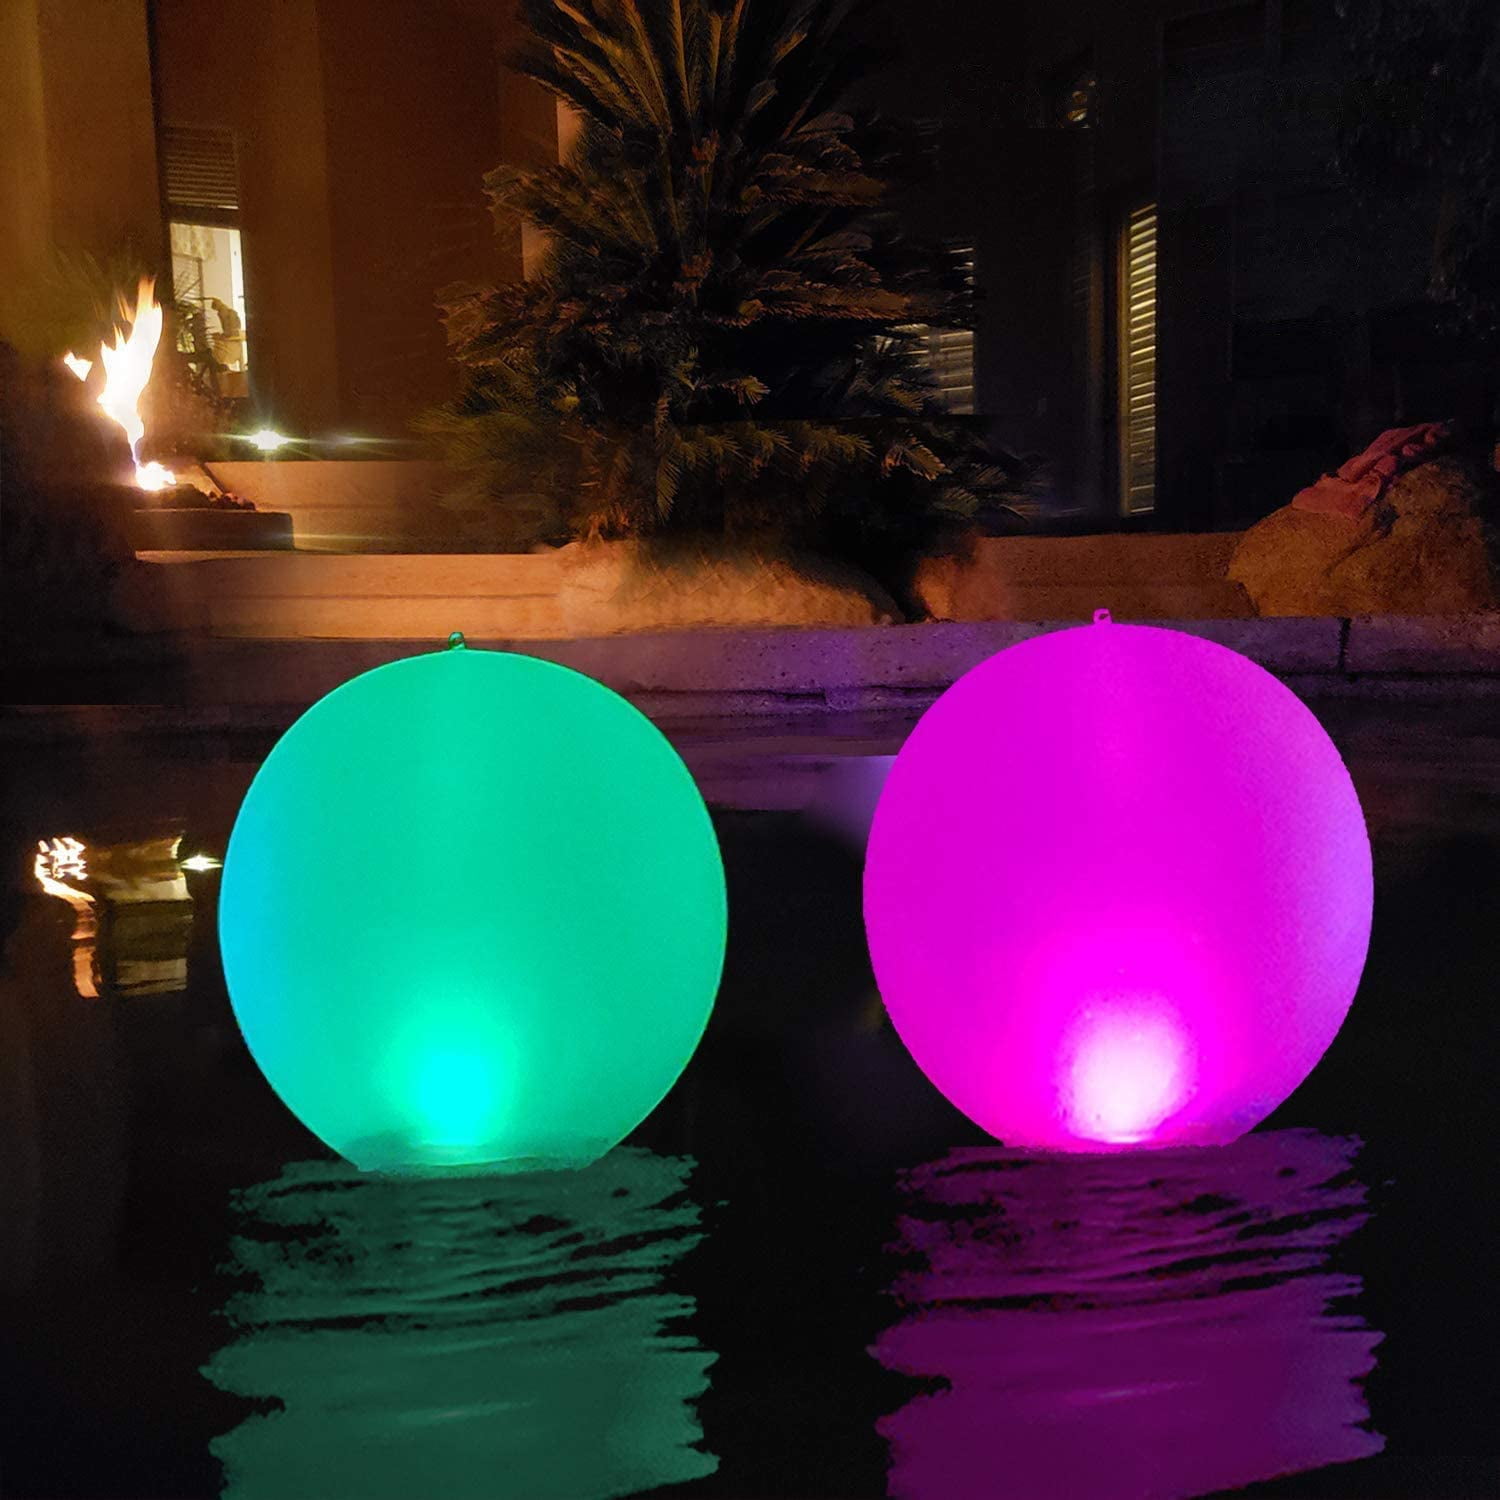 Solar Floating Pool Lights Solar Ground Lights with Remote Control Ideal Decor for Pool Parties Automatically Light up Home Outdoor Lights Outdoor 7 Color RGB,3 Packs 